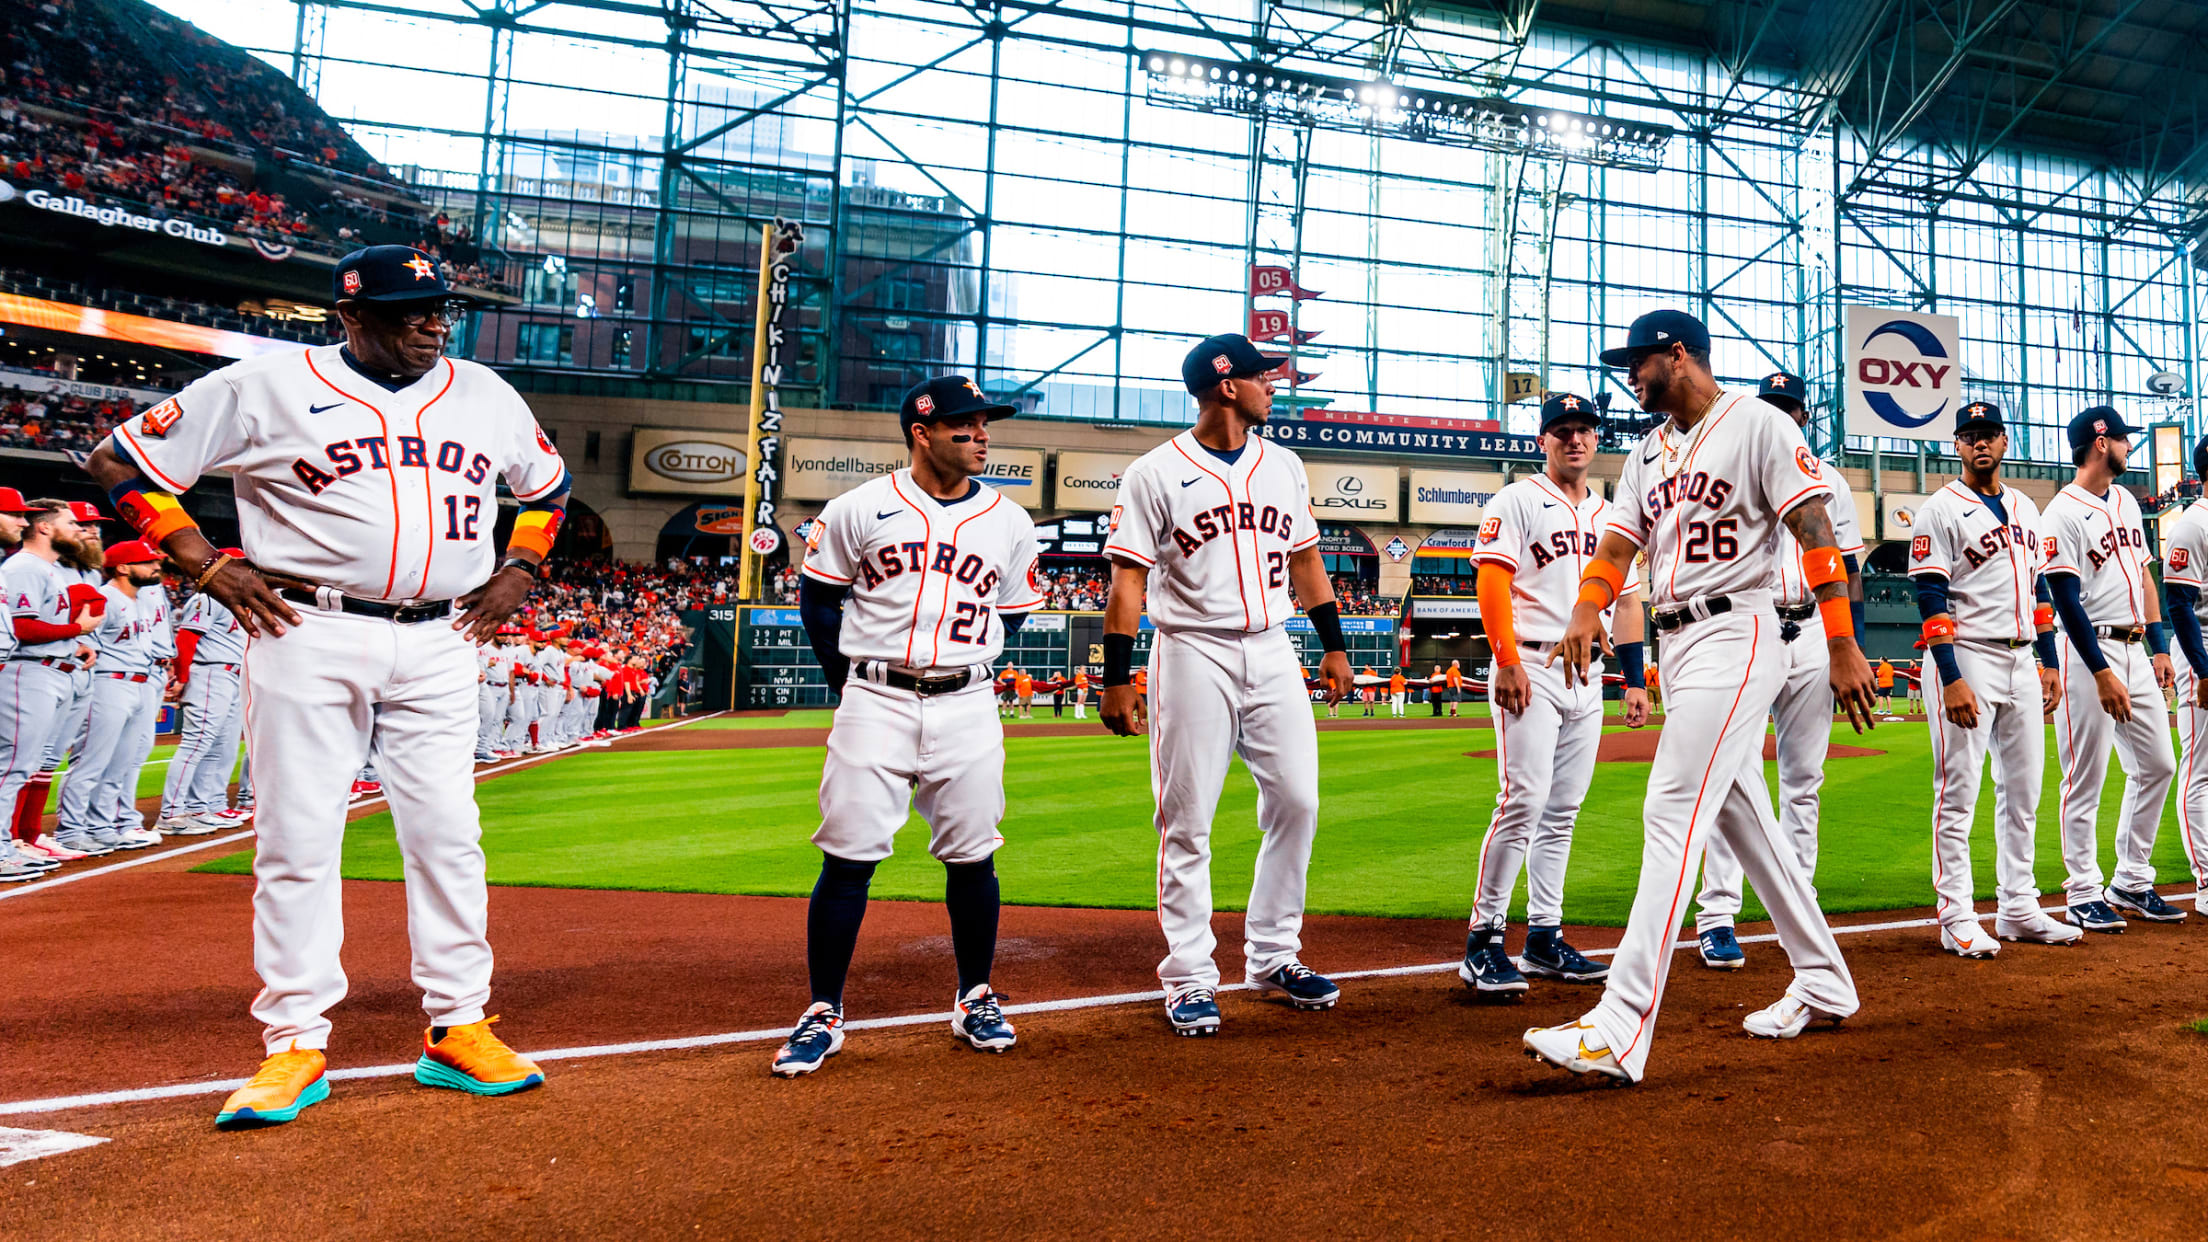 Houston Astros - #OpeningDay is in ✌️ weeks. Get your tickets